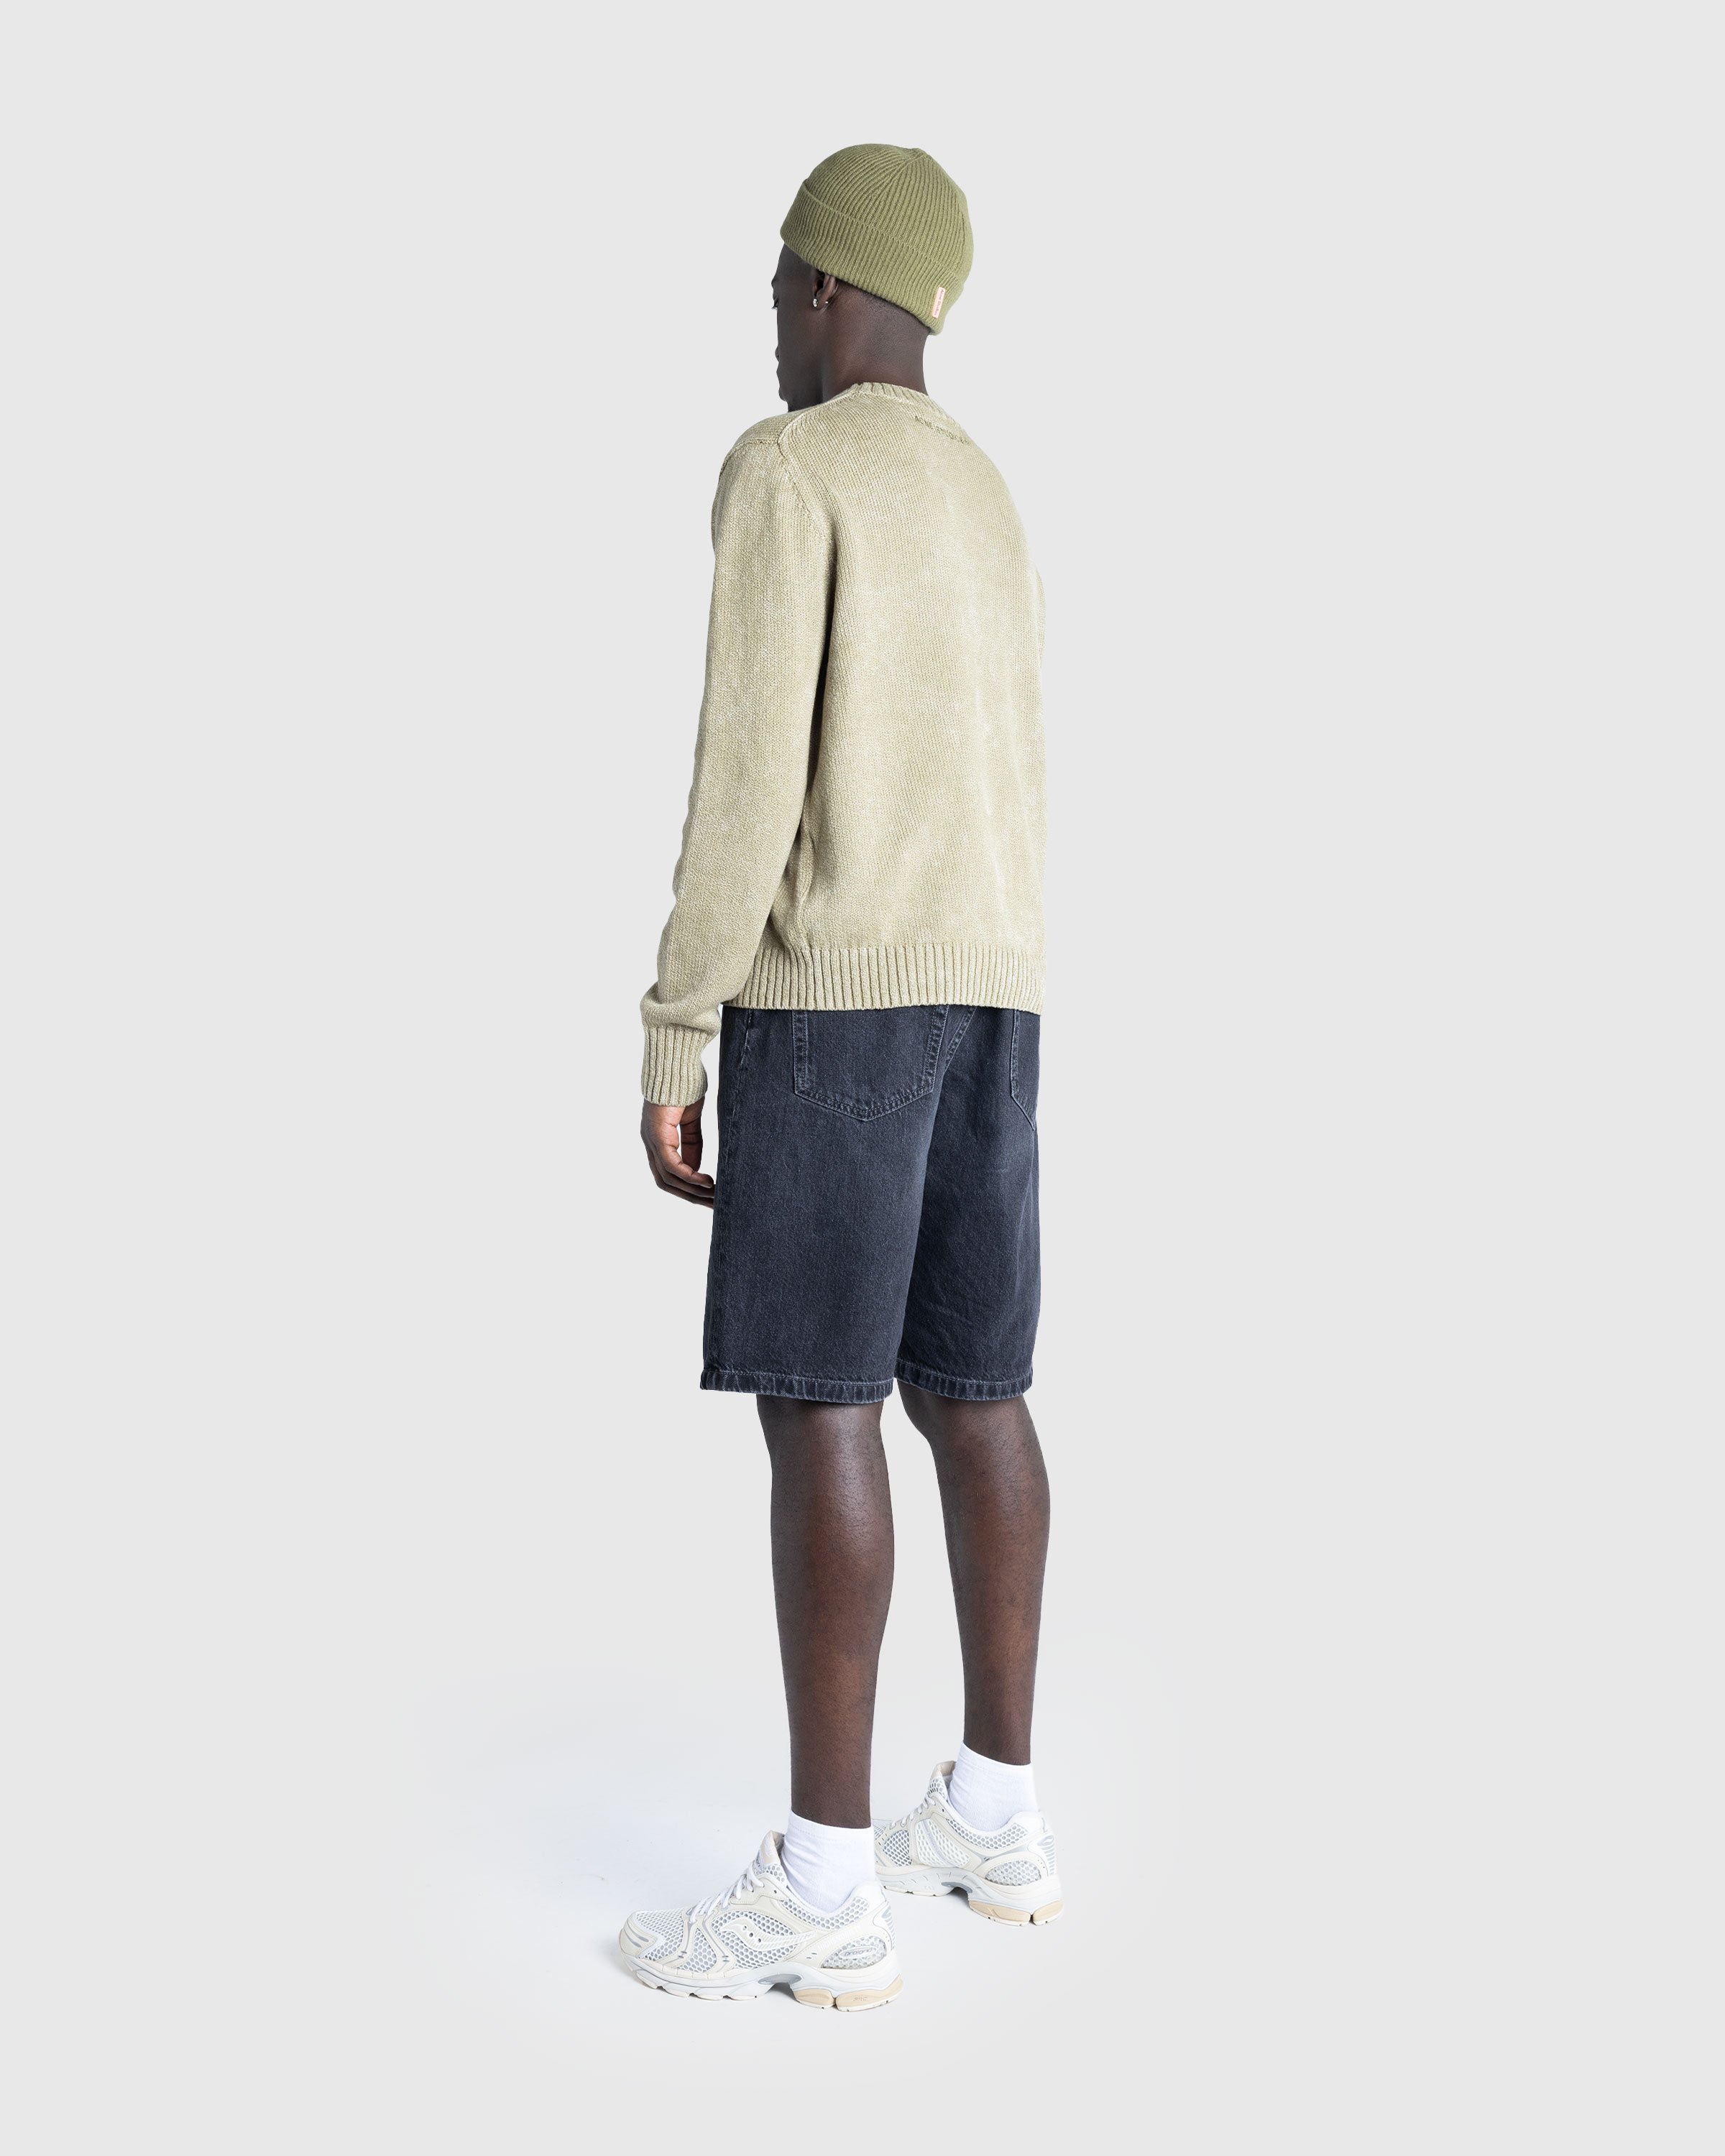 Acne Studios - FN-MN-KNIT000443 Olive Green - Clothing - Green - Image 4